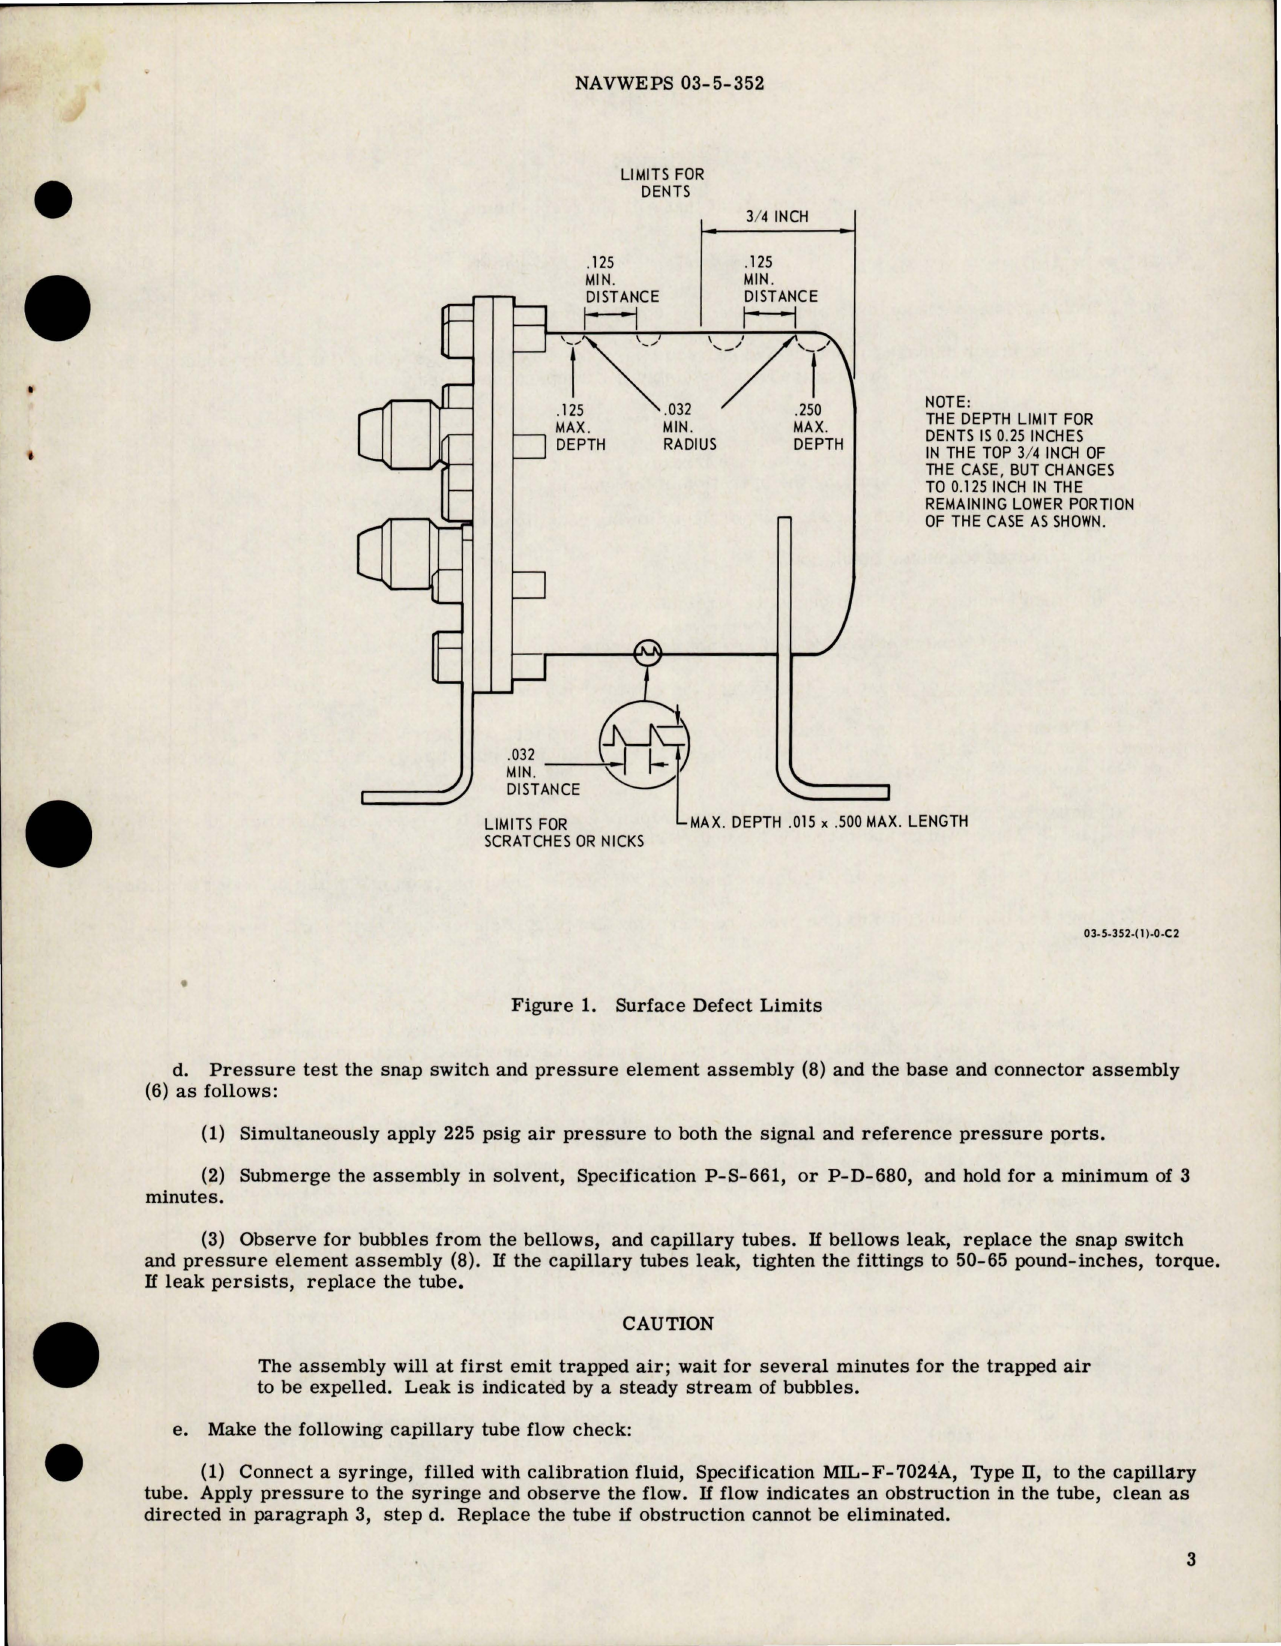 Sample page 5 from AirCorps Library document: Overhaul Instructions with Parts Breakdown for Filter Bypass Pressure Indicator Switch